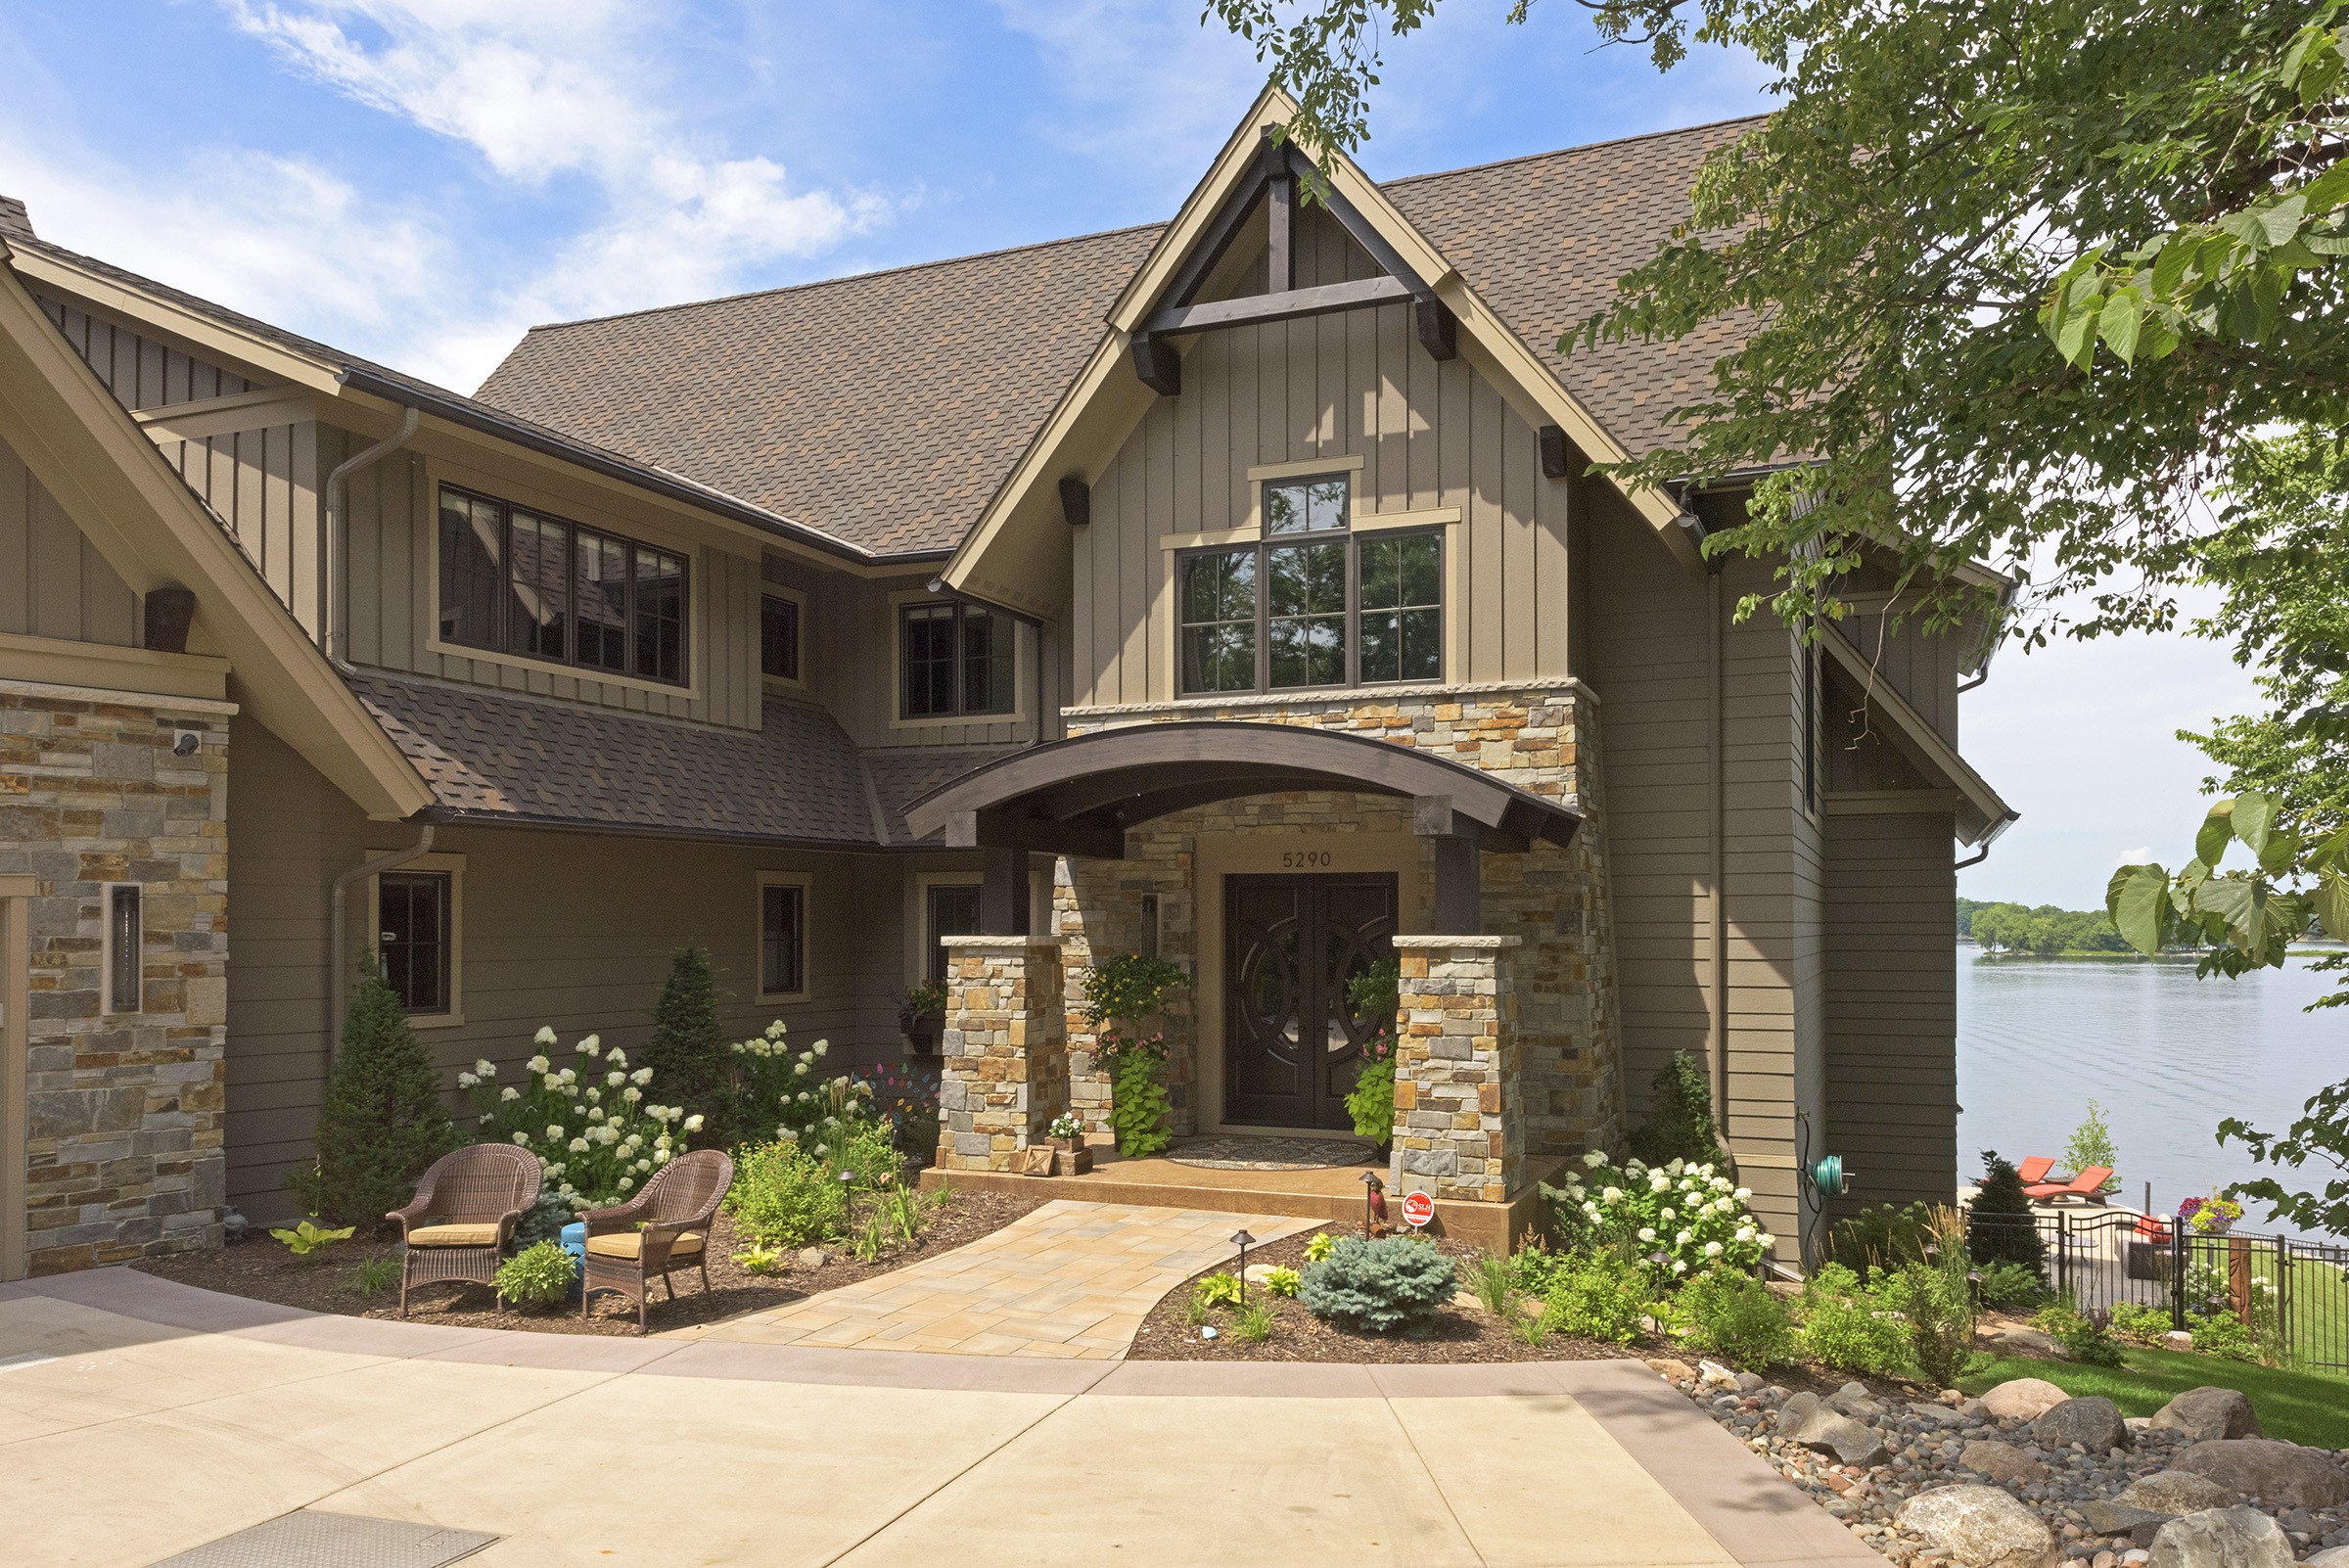 Large brown home on a lake with grand front door with stone surround.